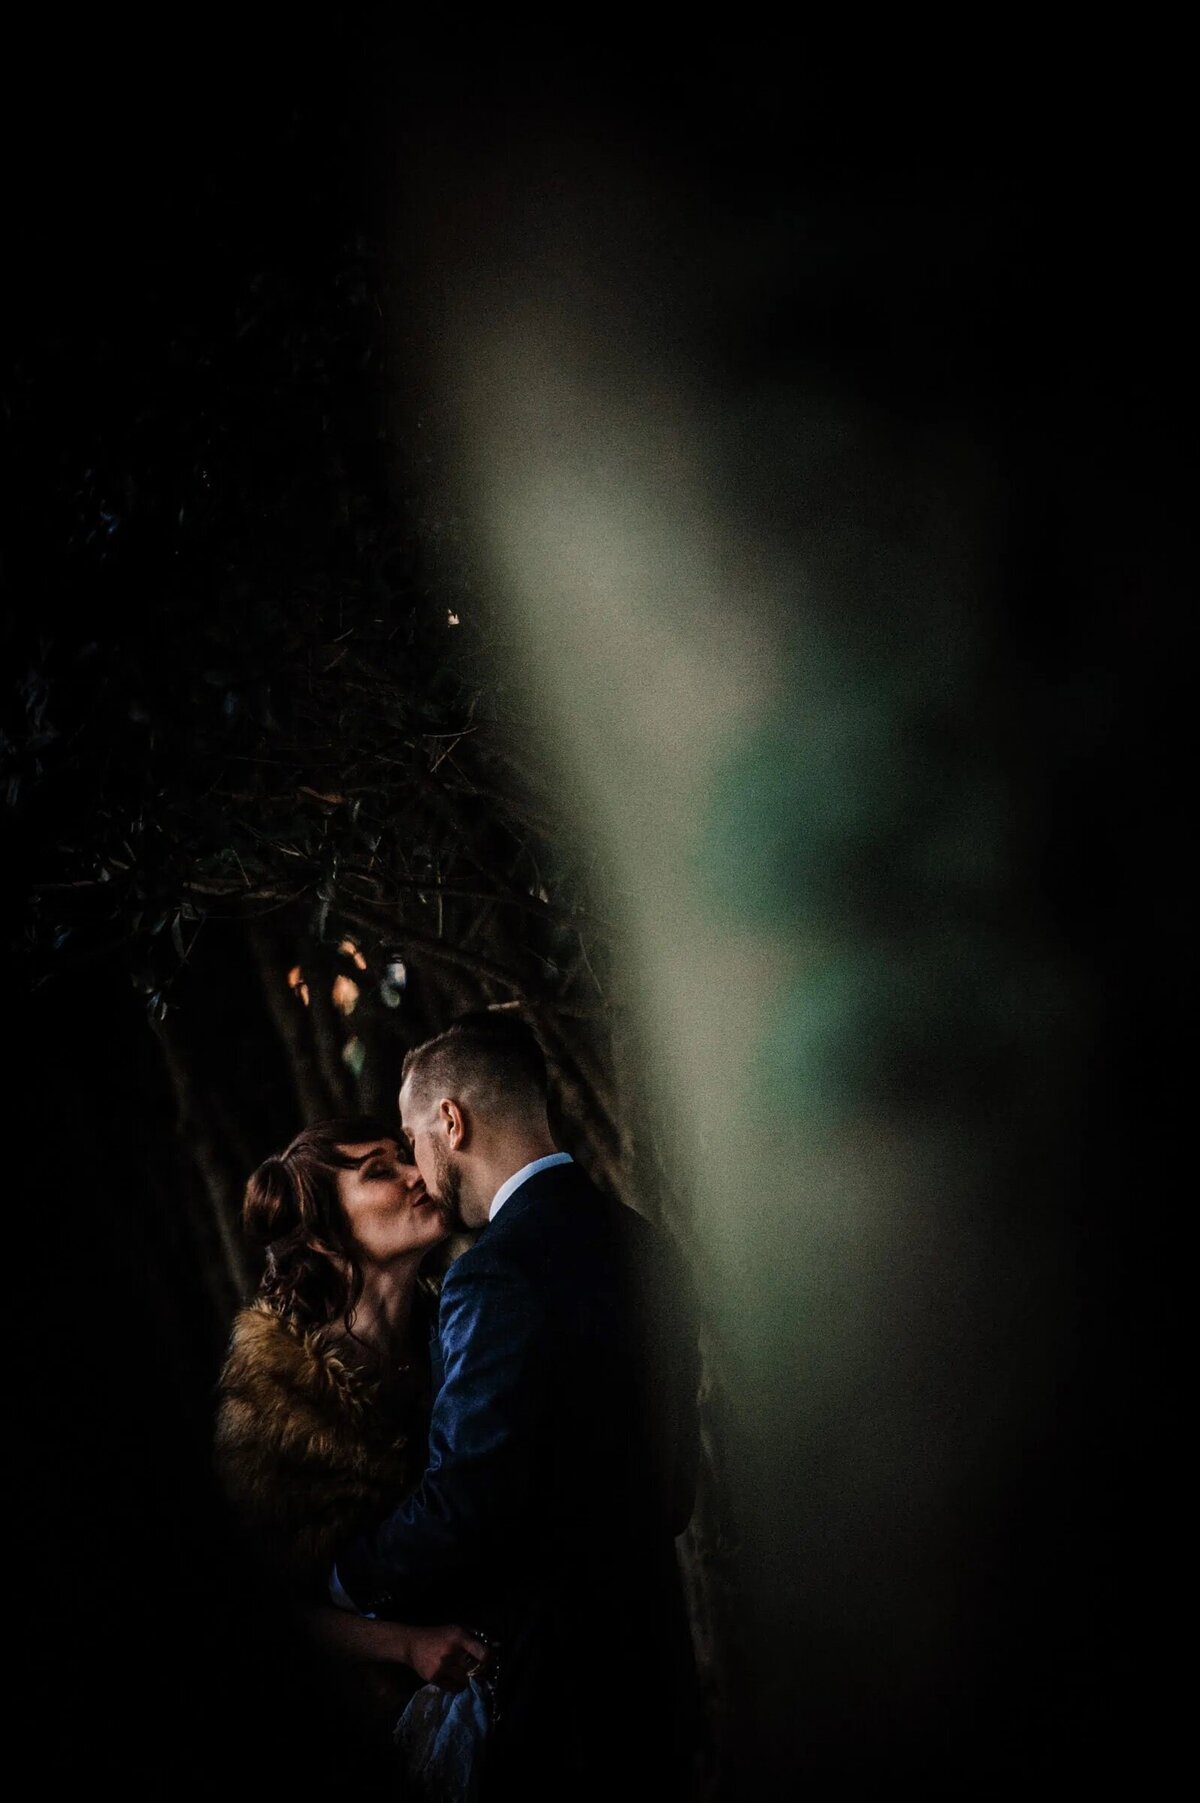 A bride and groom kissing in darkness.